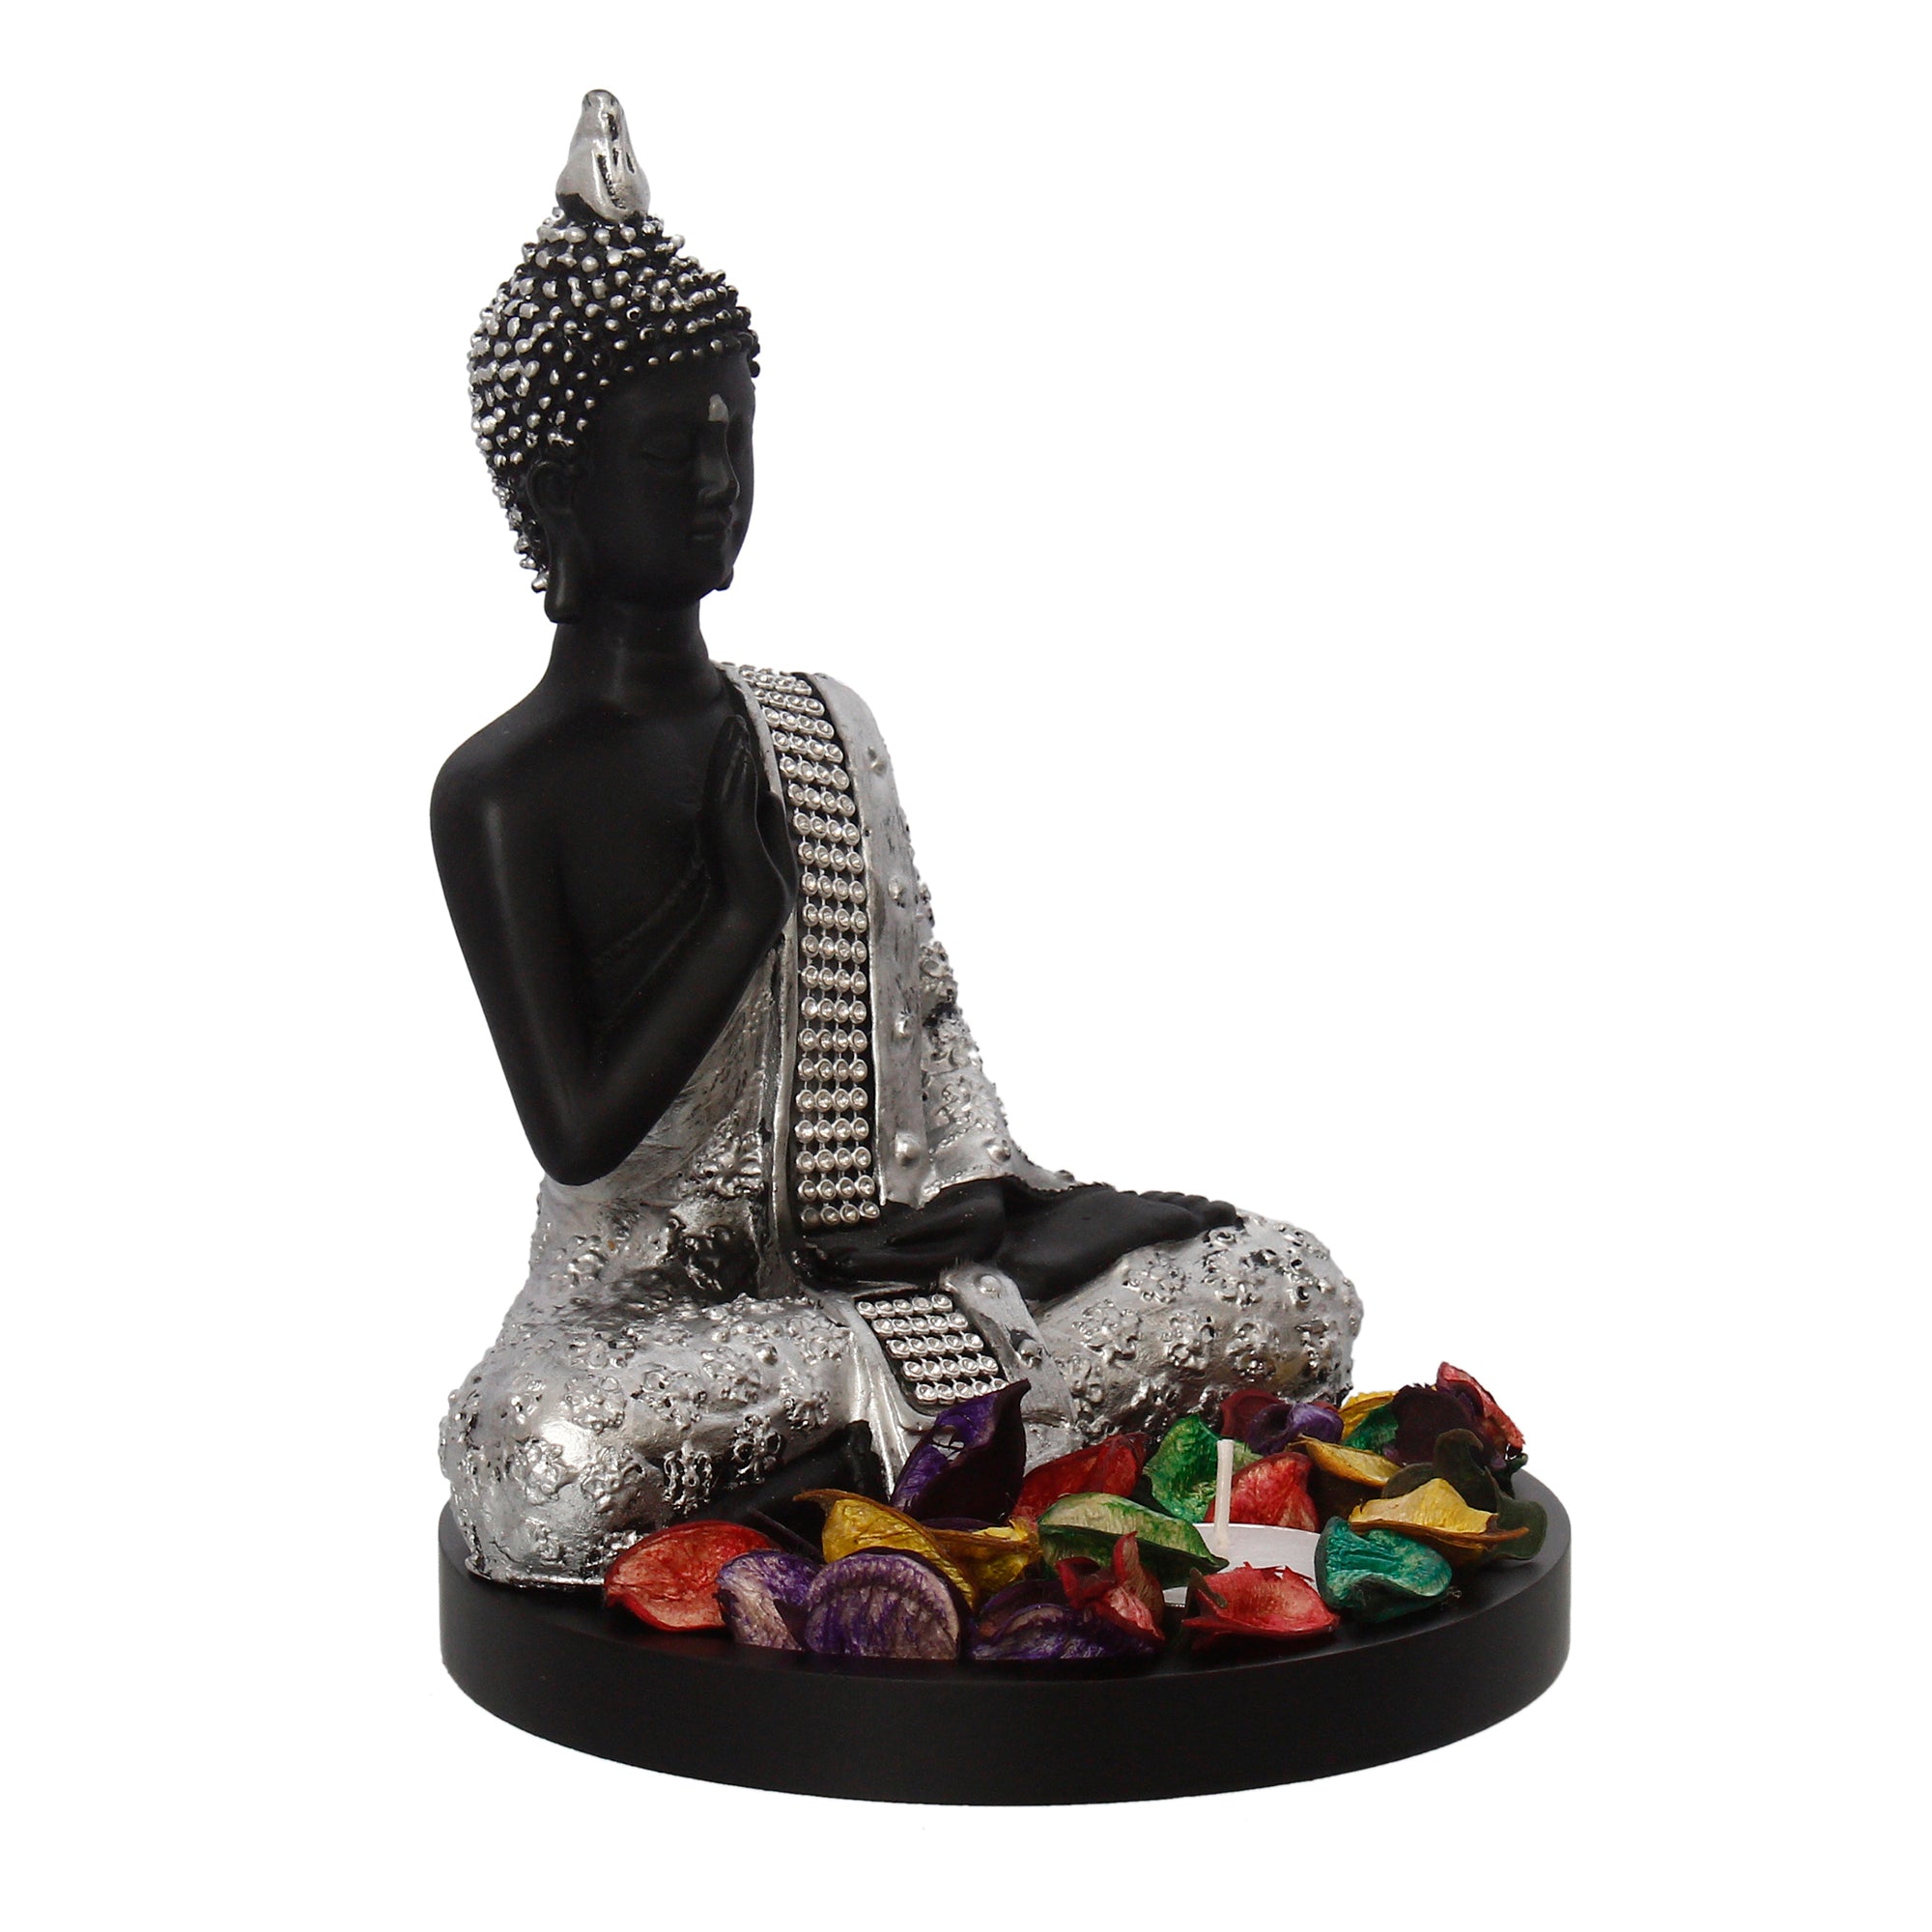 Polyresin Black and Silver Handcrafted Meditating Blessing Buddha Statue with Wooden Base, Fragranced Petals and Tealight 4